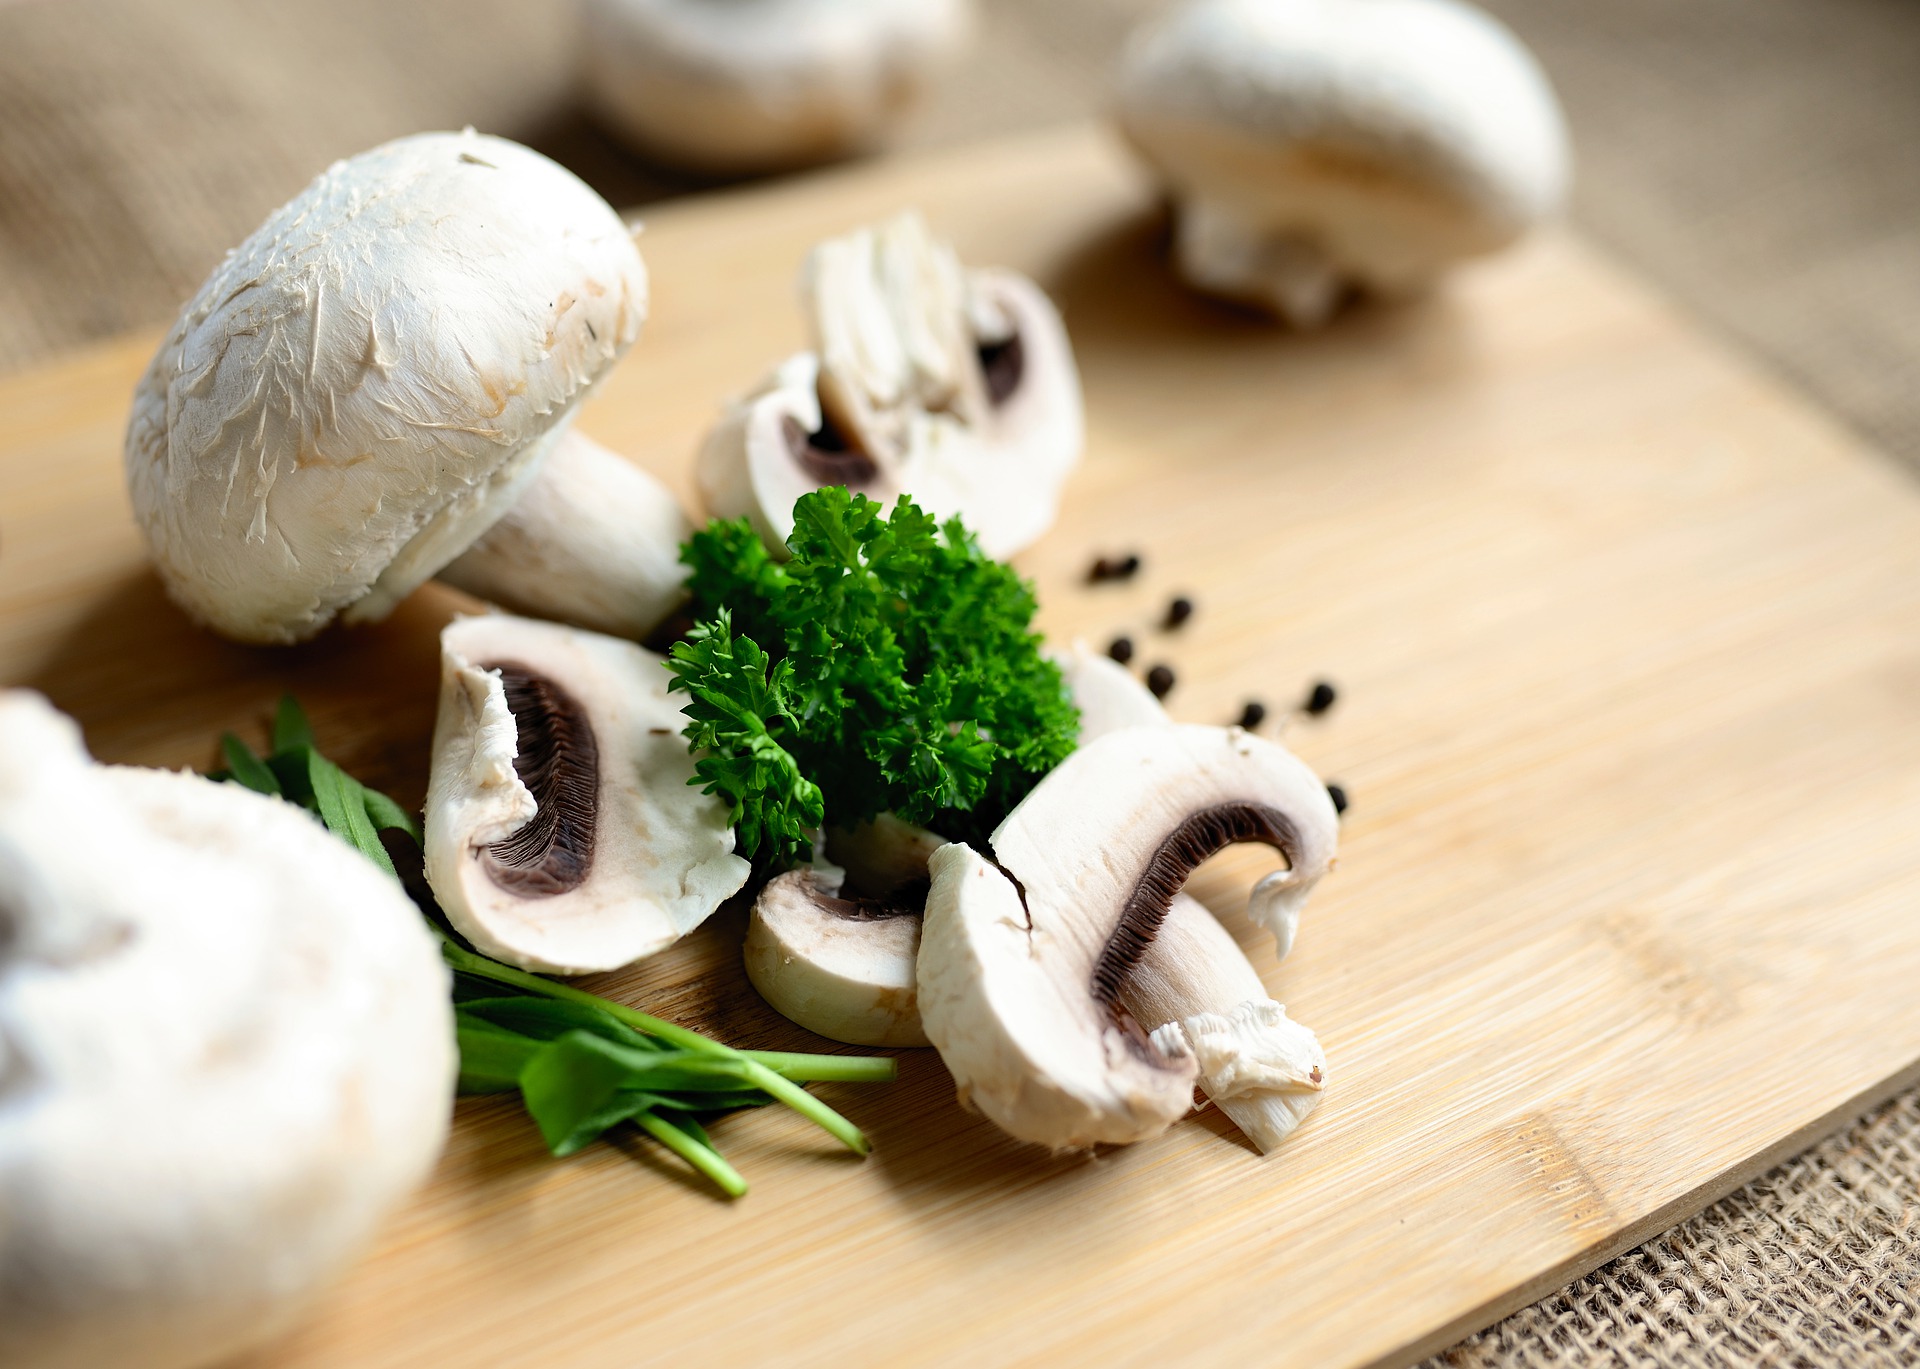 10 Reasons Why Mushrooms Are Good for Your Health